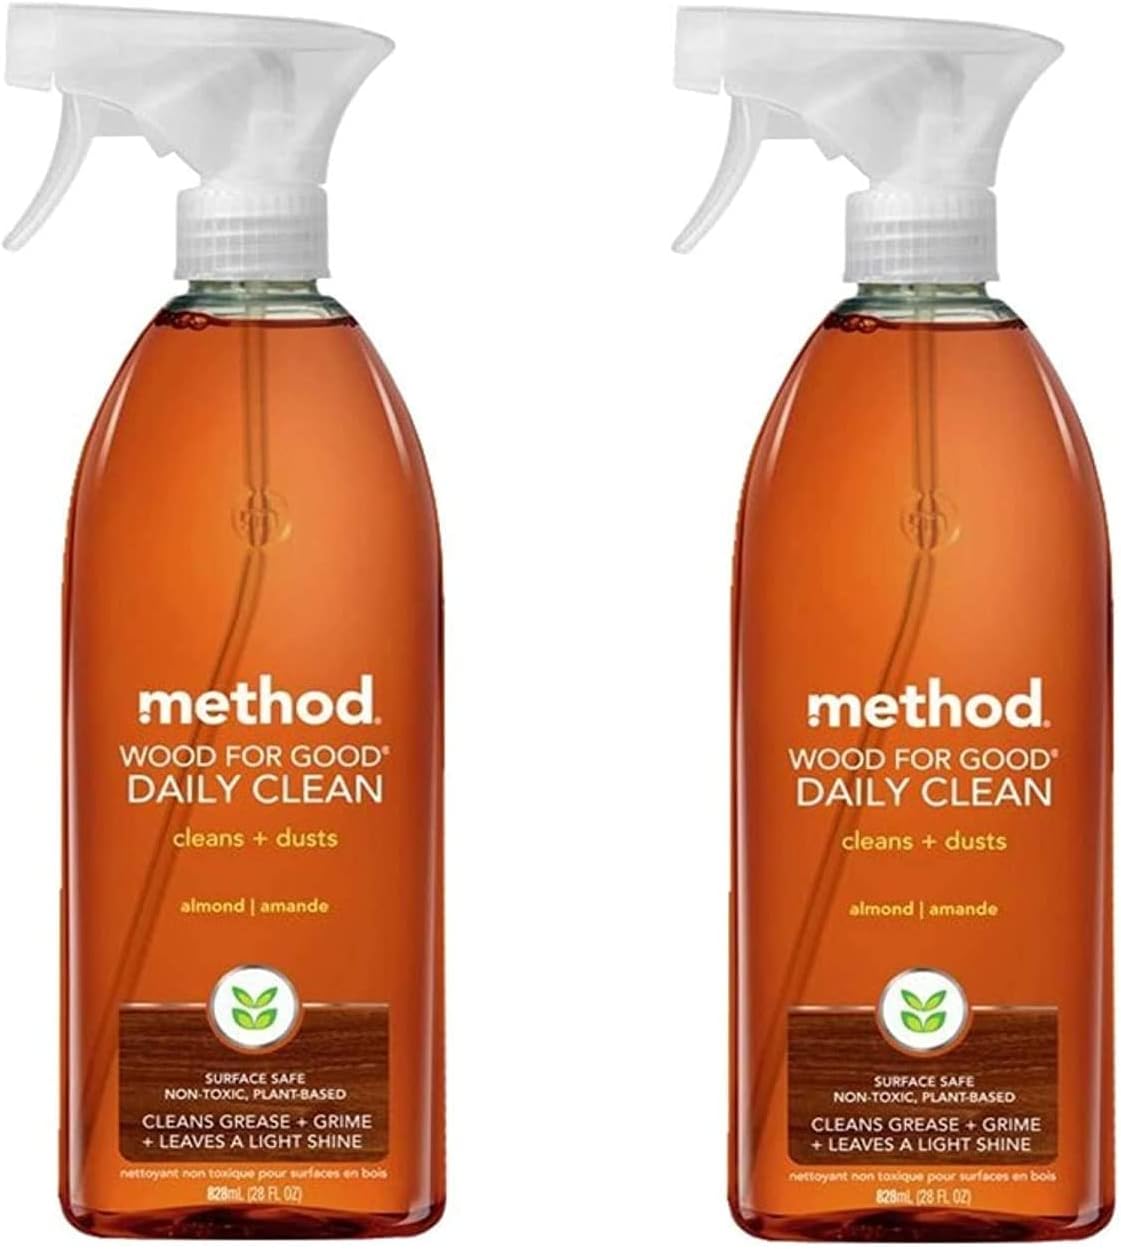 Method Wood for Good Daily Clean Almond -28 fl oz - (Pack of 2